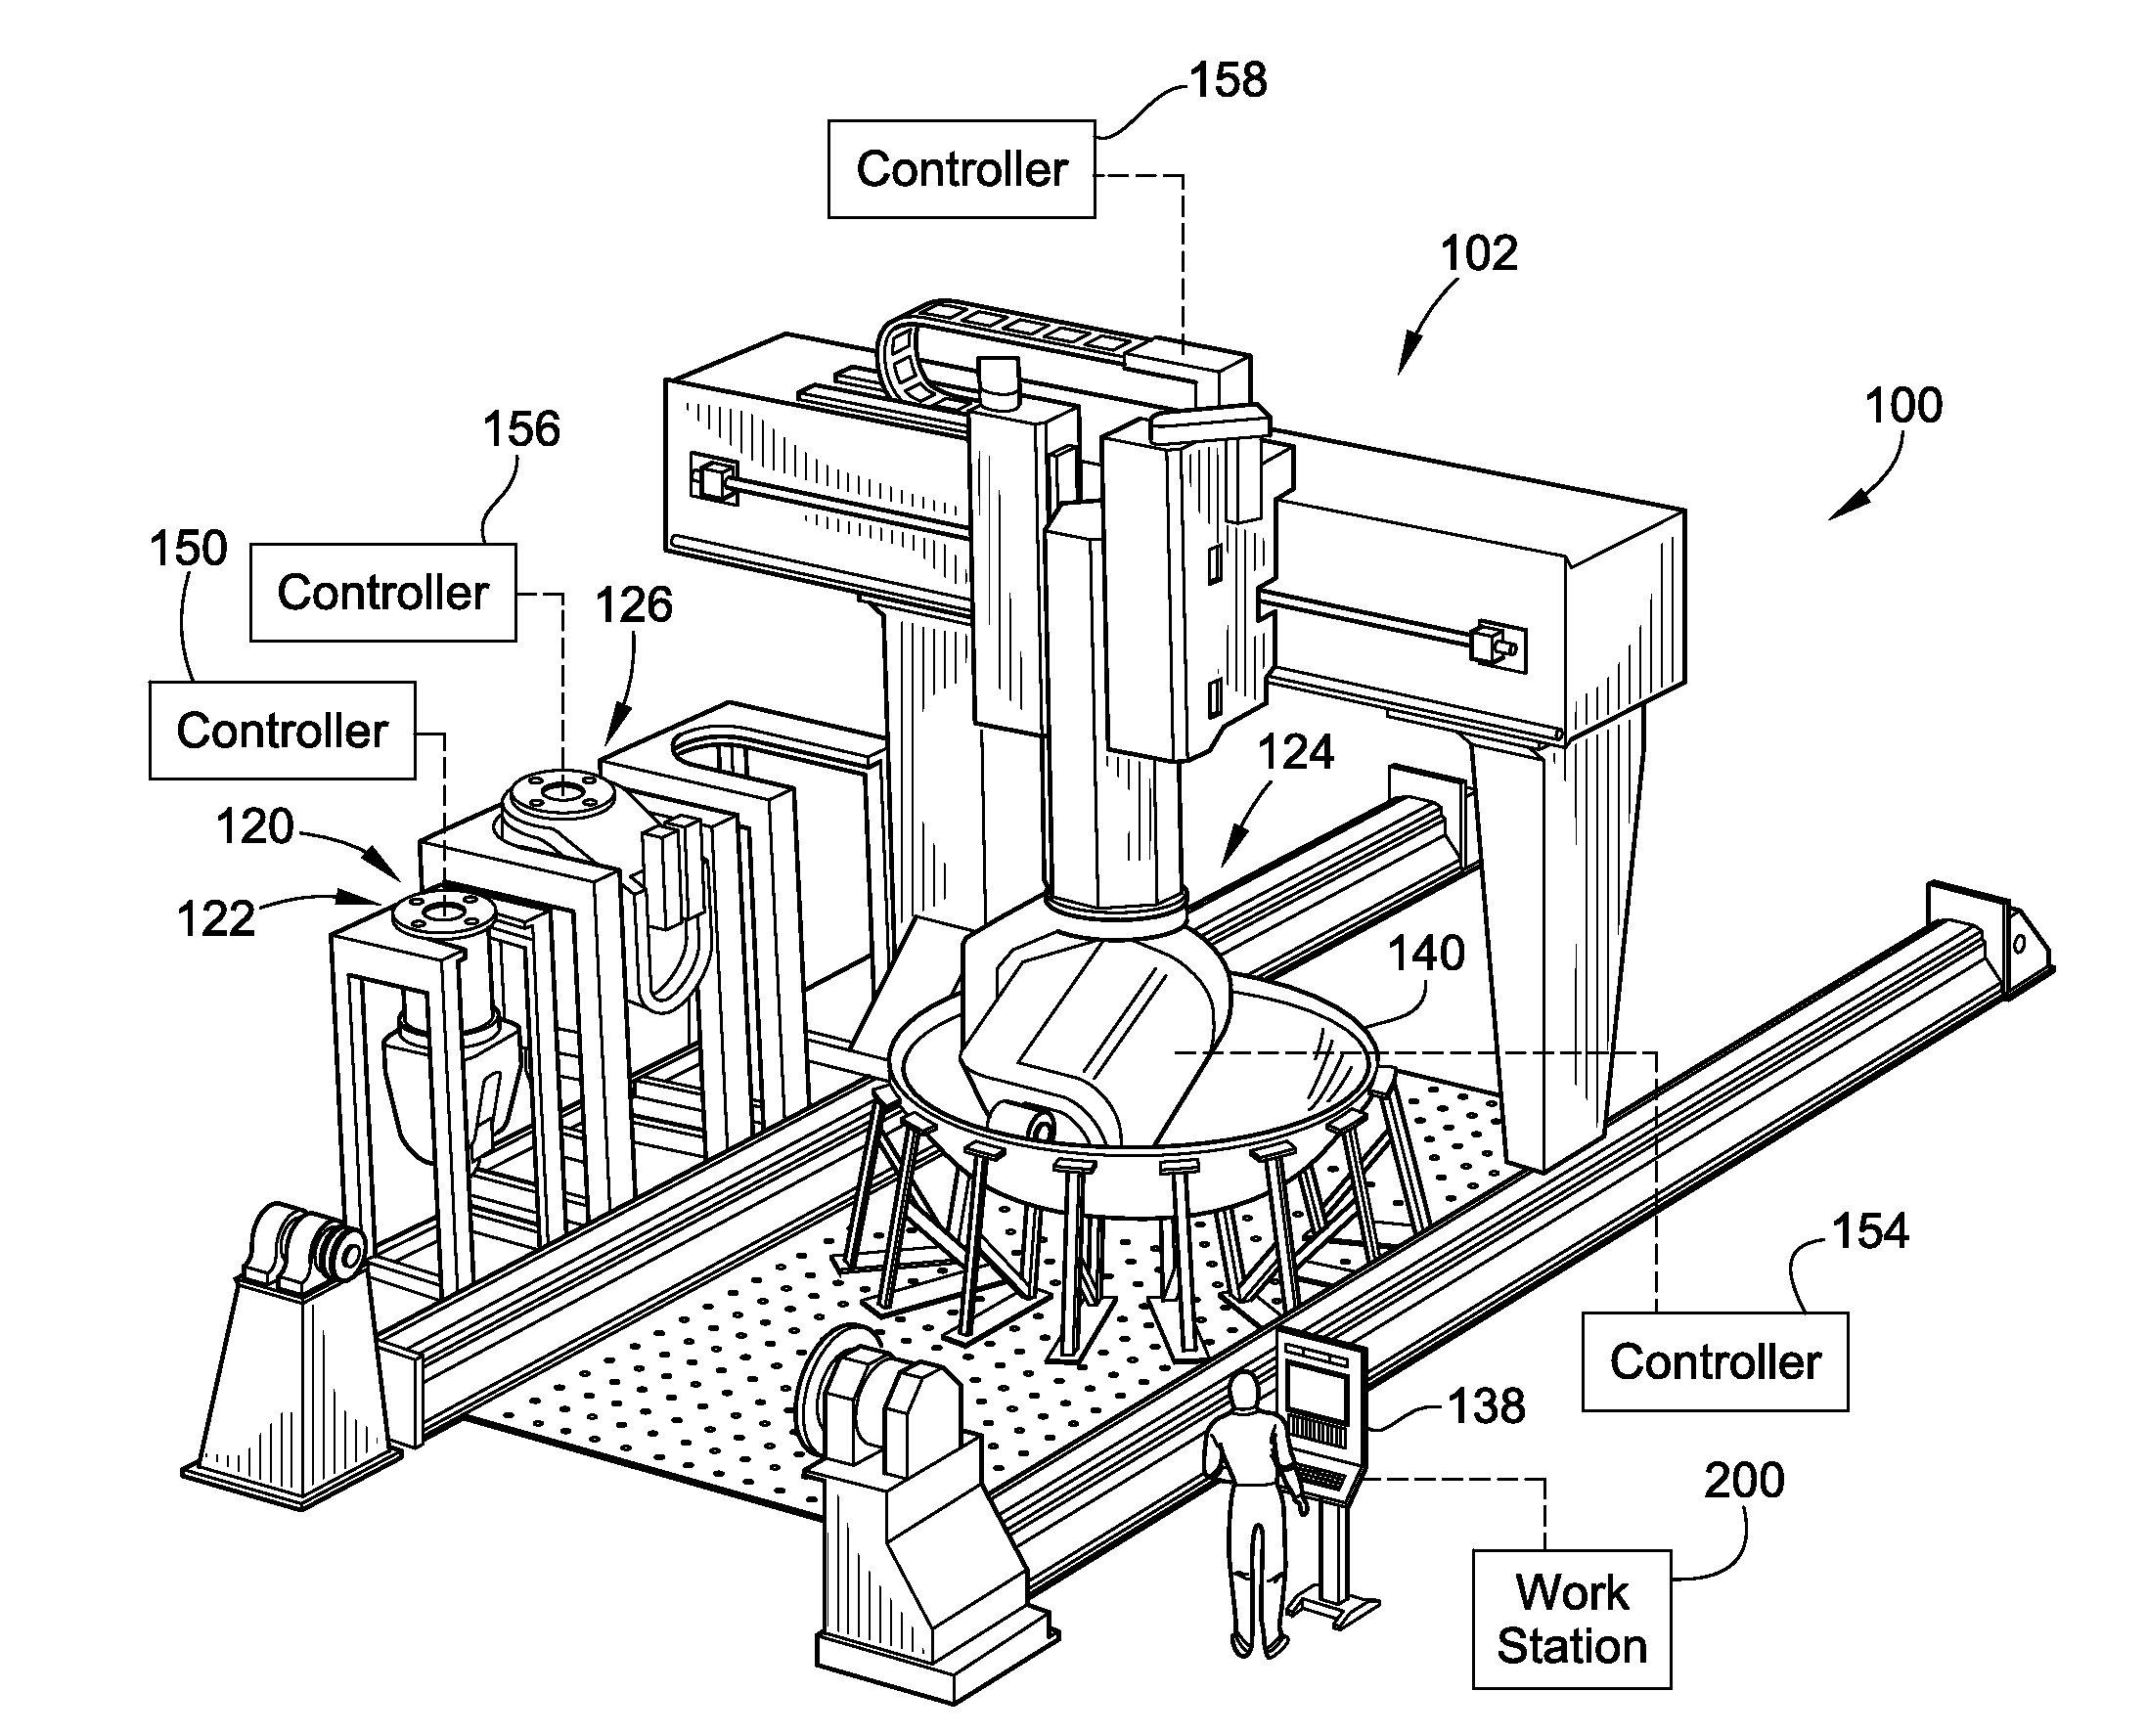 Manufacturing process and apparatus having an interchangeable machine tool head with integrated control